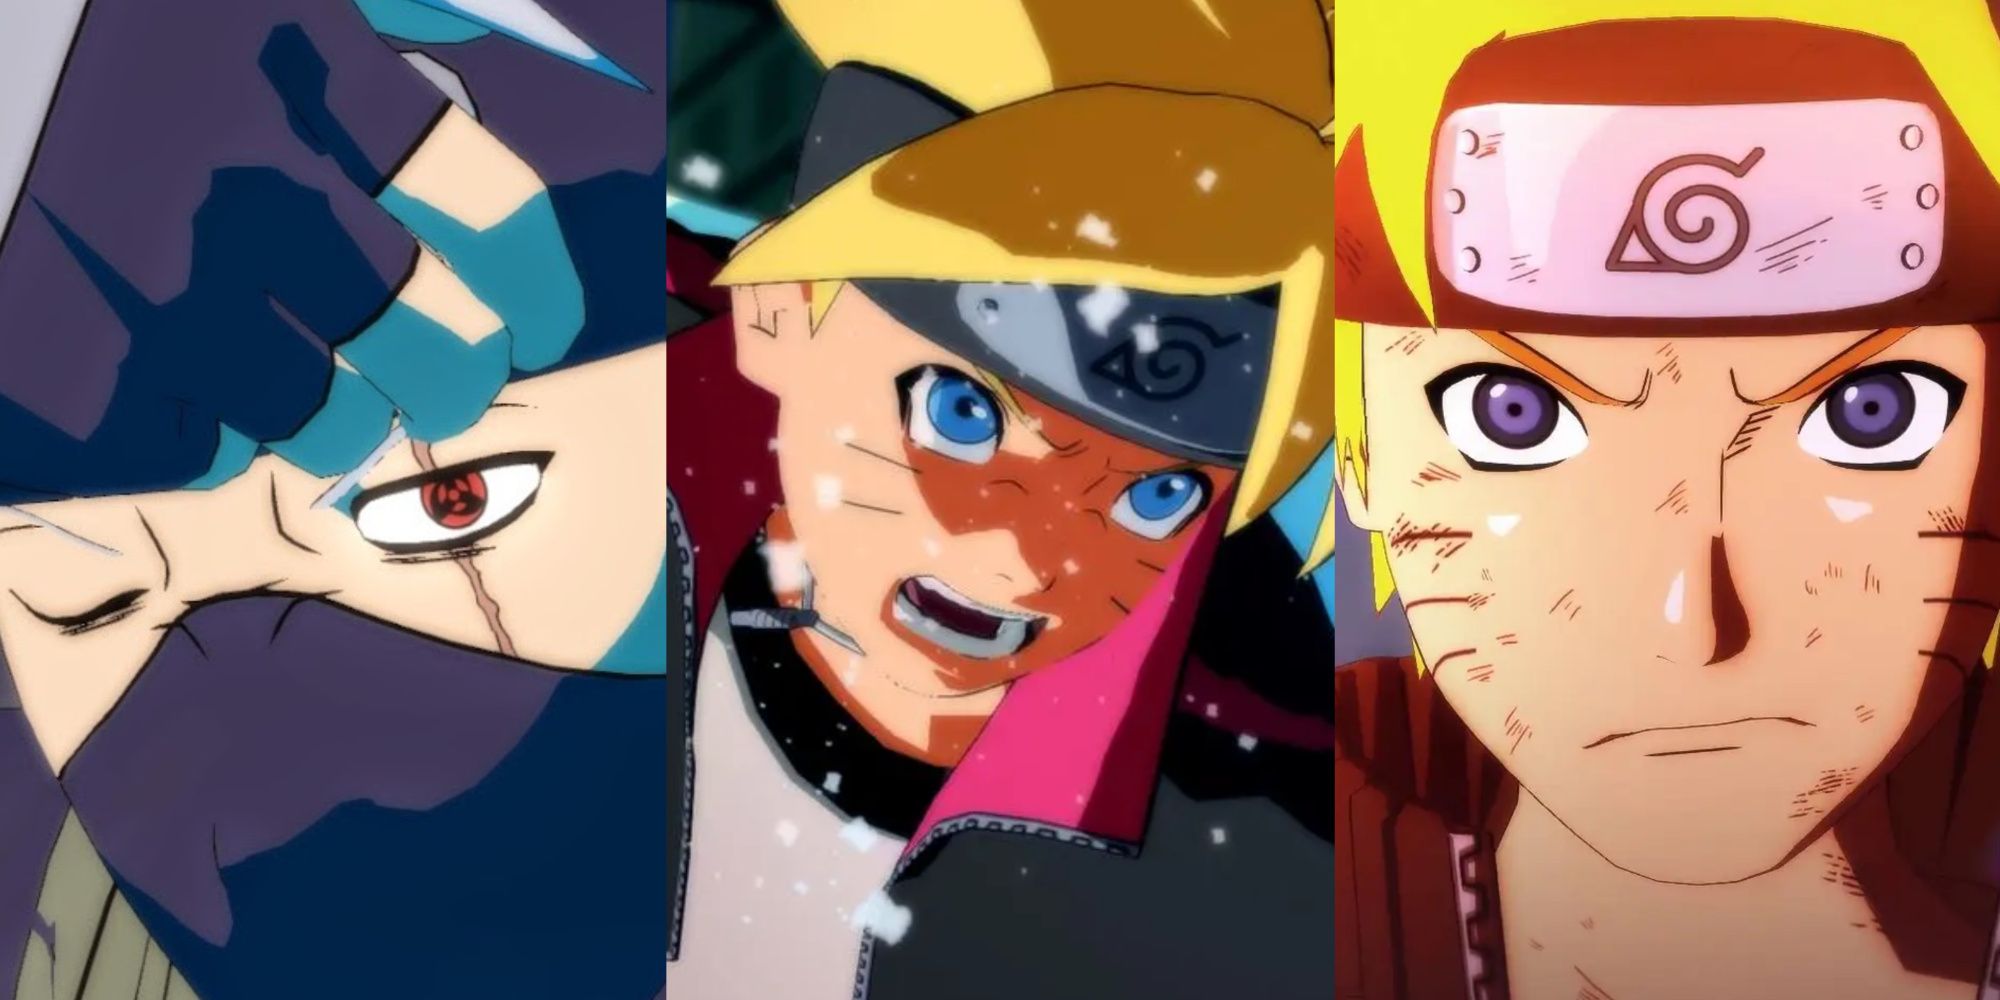 15 Best Naruto Opening Songs, Ranked